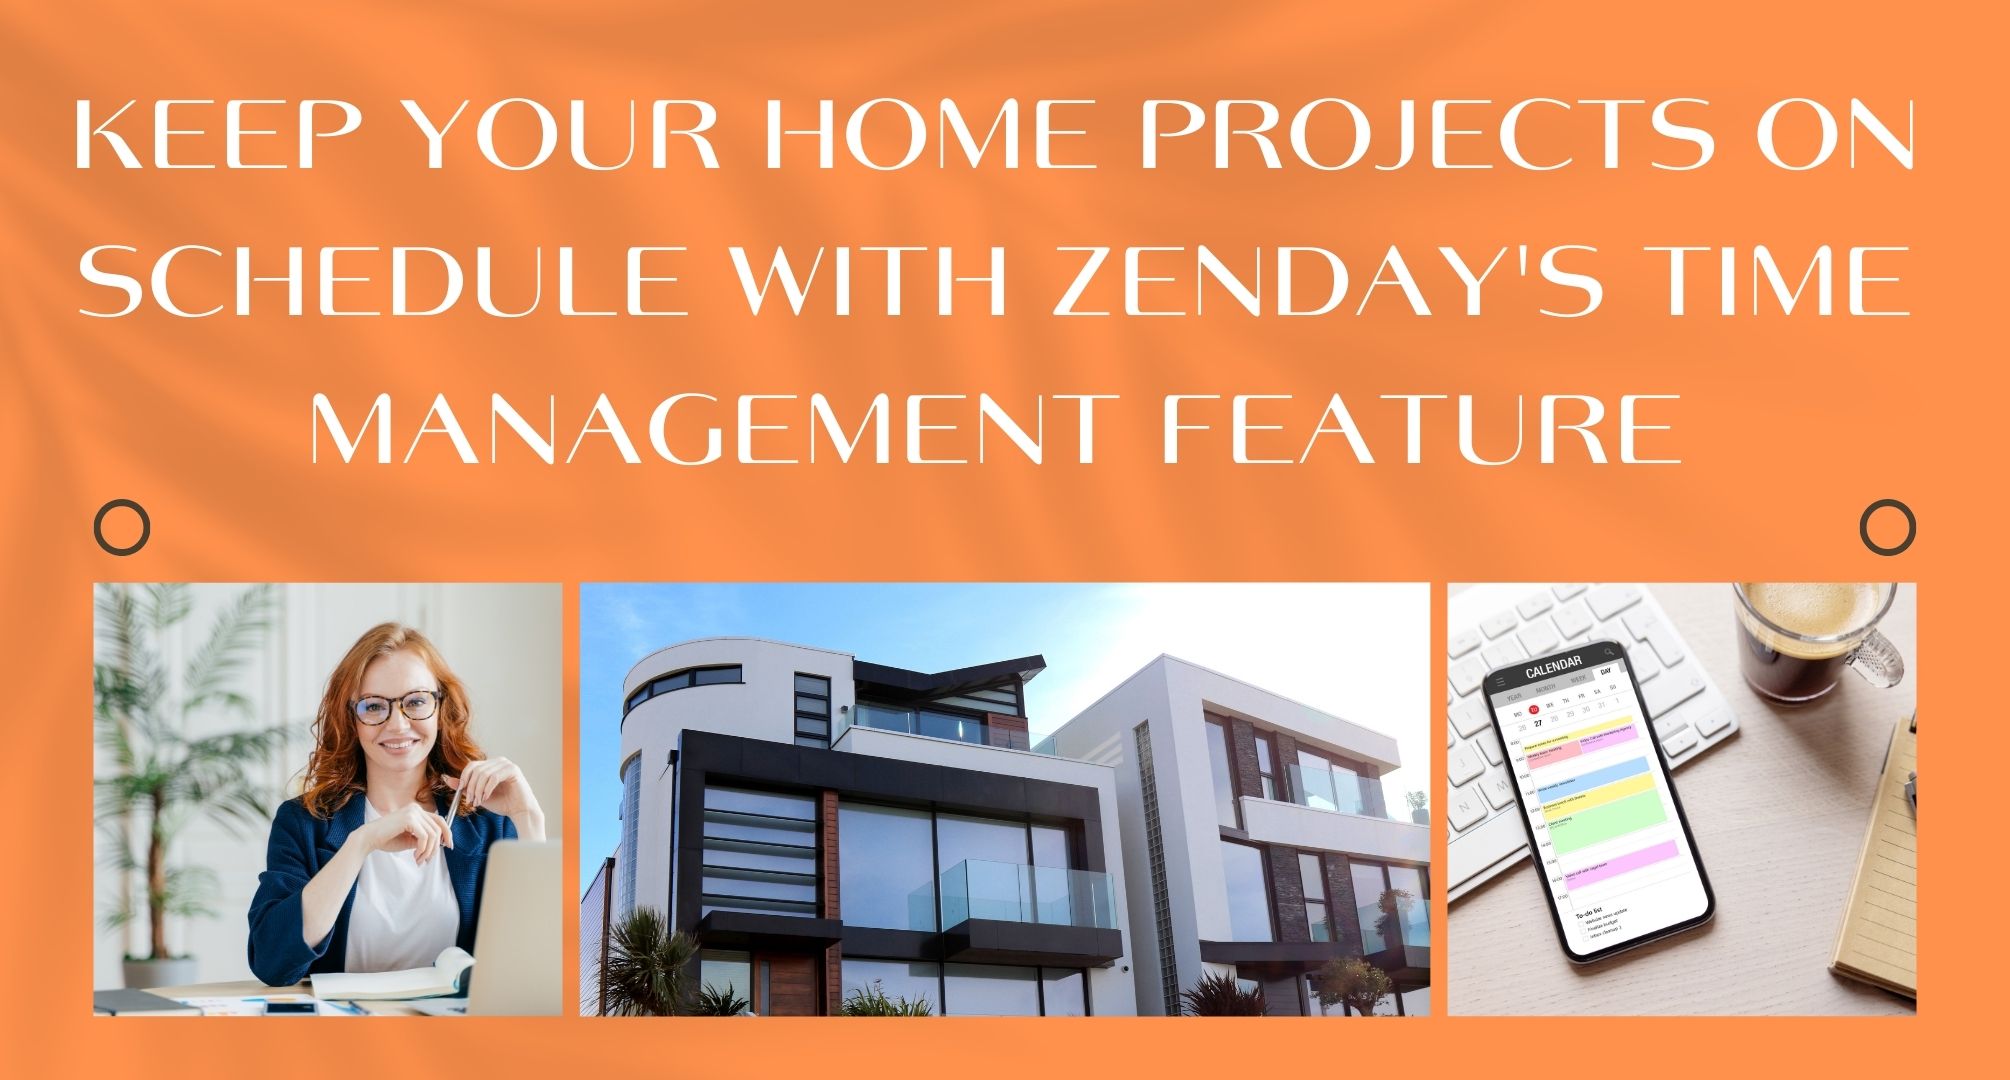 Keep Your Home Projects on Schedule with Zenday's Time Management Feature